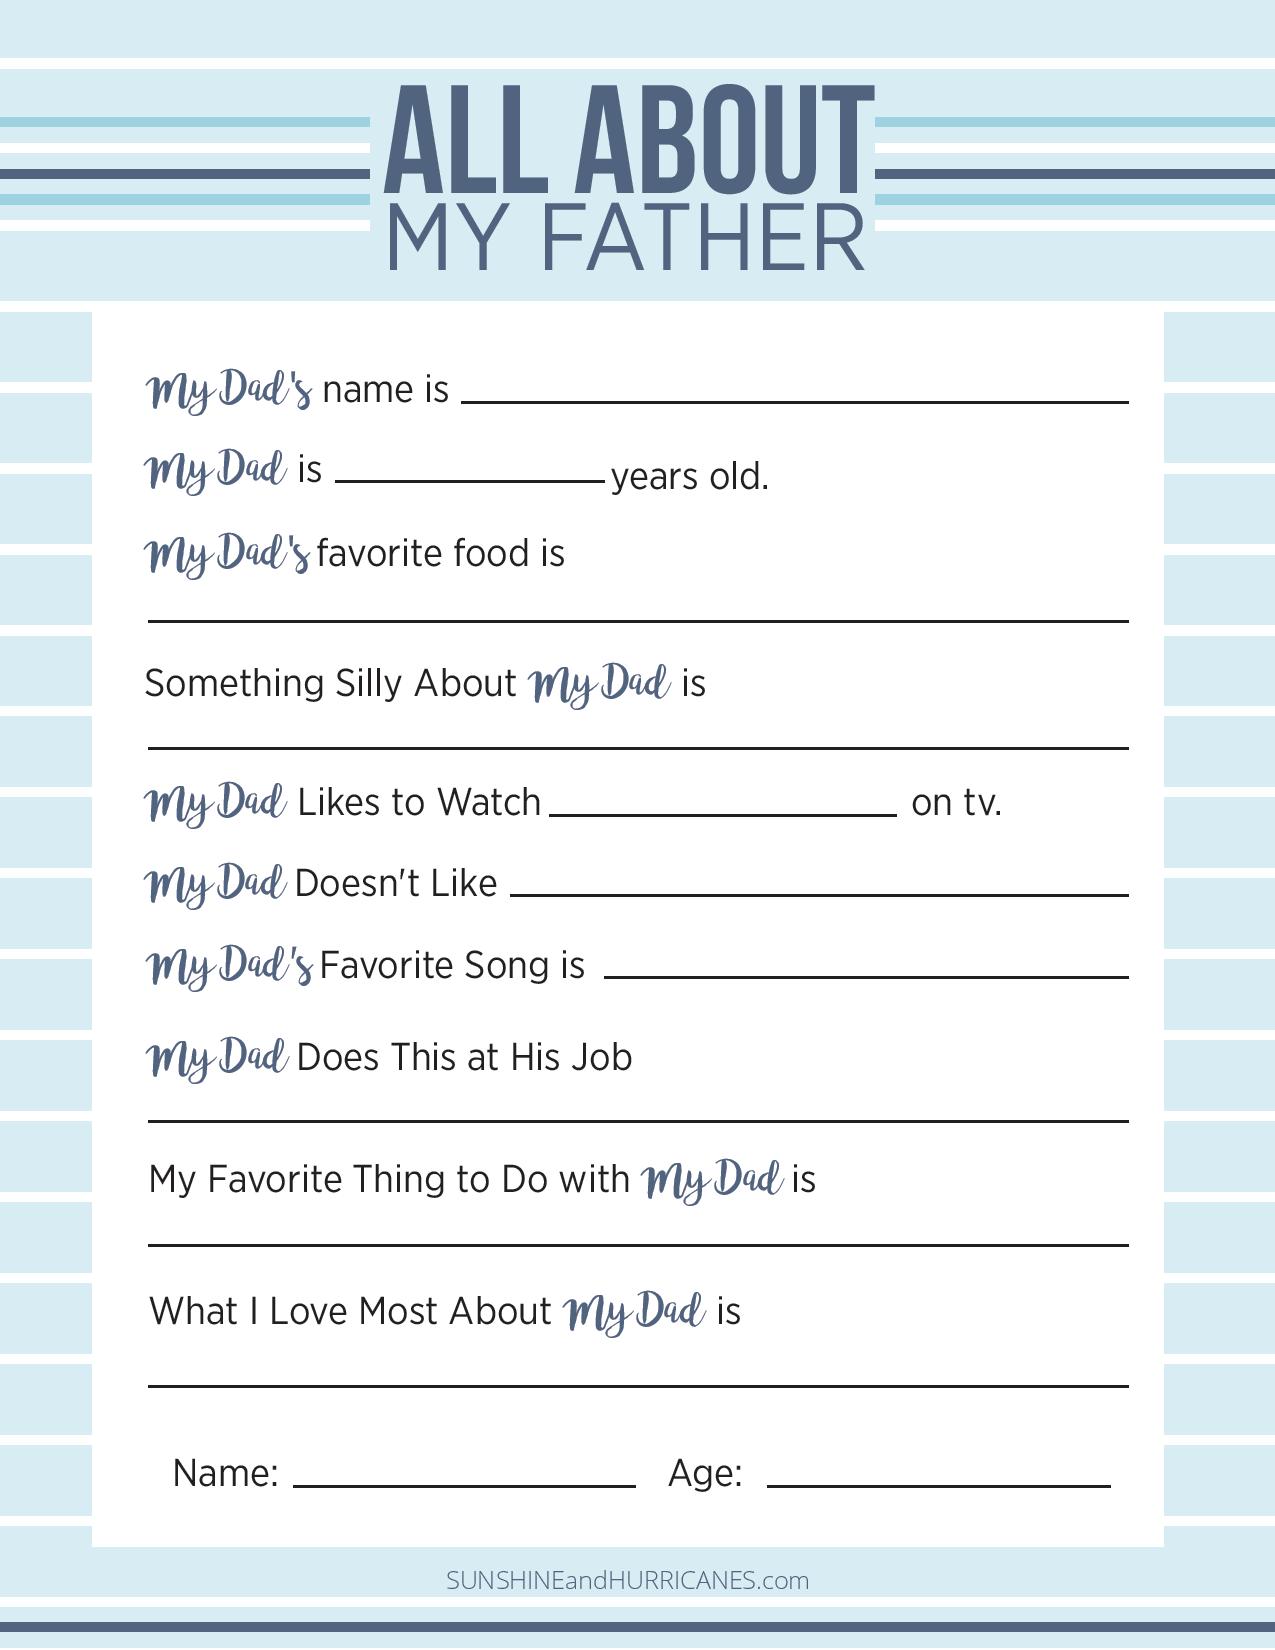 14 Adorable Father s Day Questionnaires Kitty Baby Love